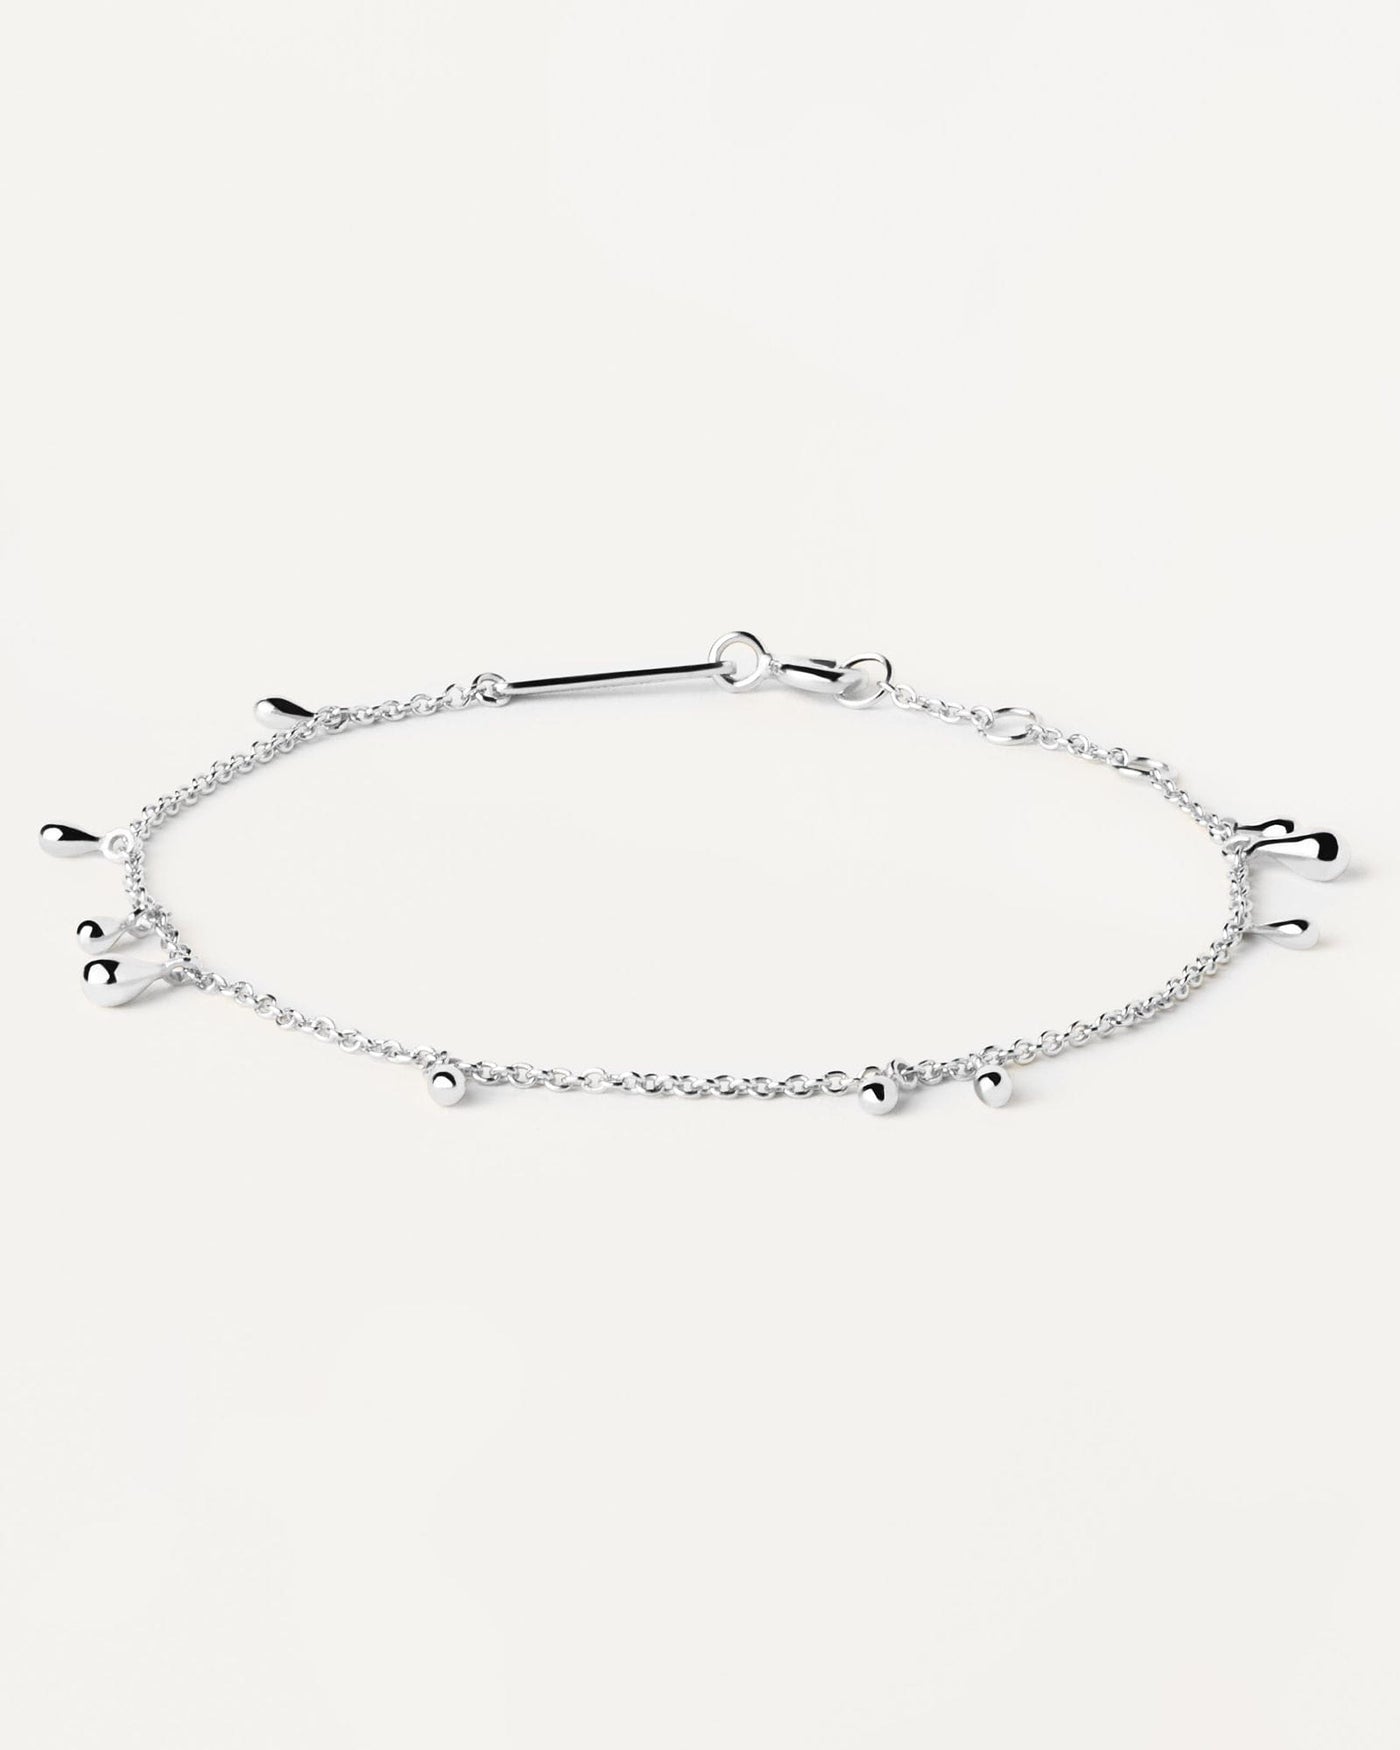 2024 Selection | Teardrop Silver Bracelet. Sterling silver bracelet with small drop pendants. Get the latest arrival from PDPAOLA. Place your order safely and get this Best Seller. Free Shipping.